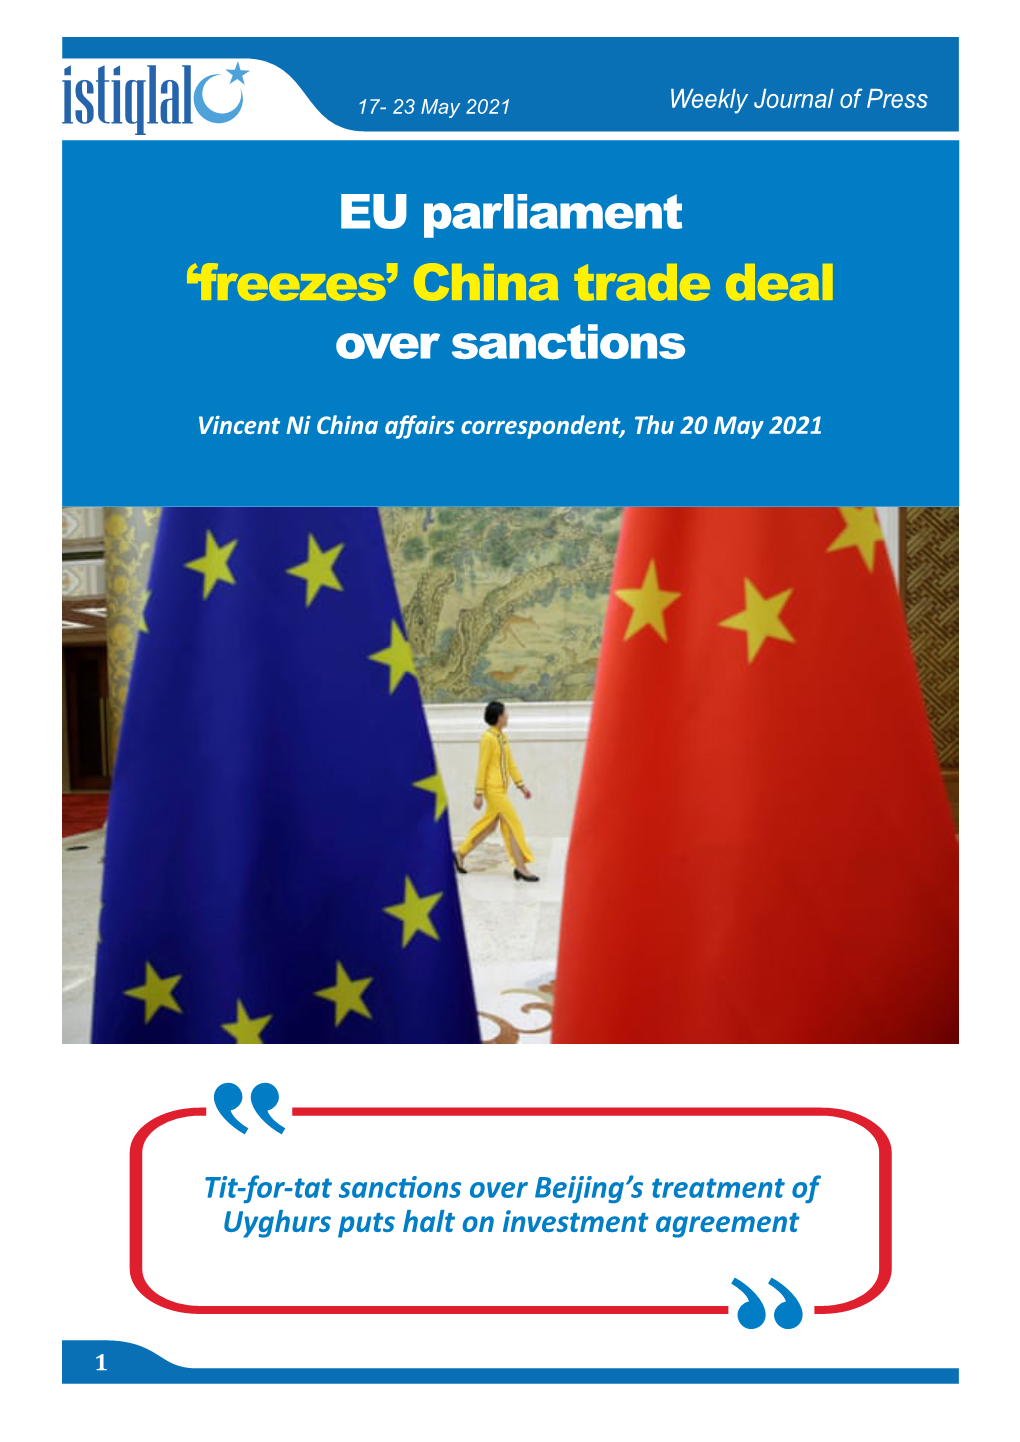 'Freezes' China Trade Deal